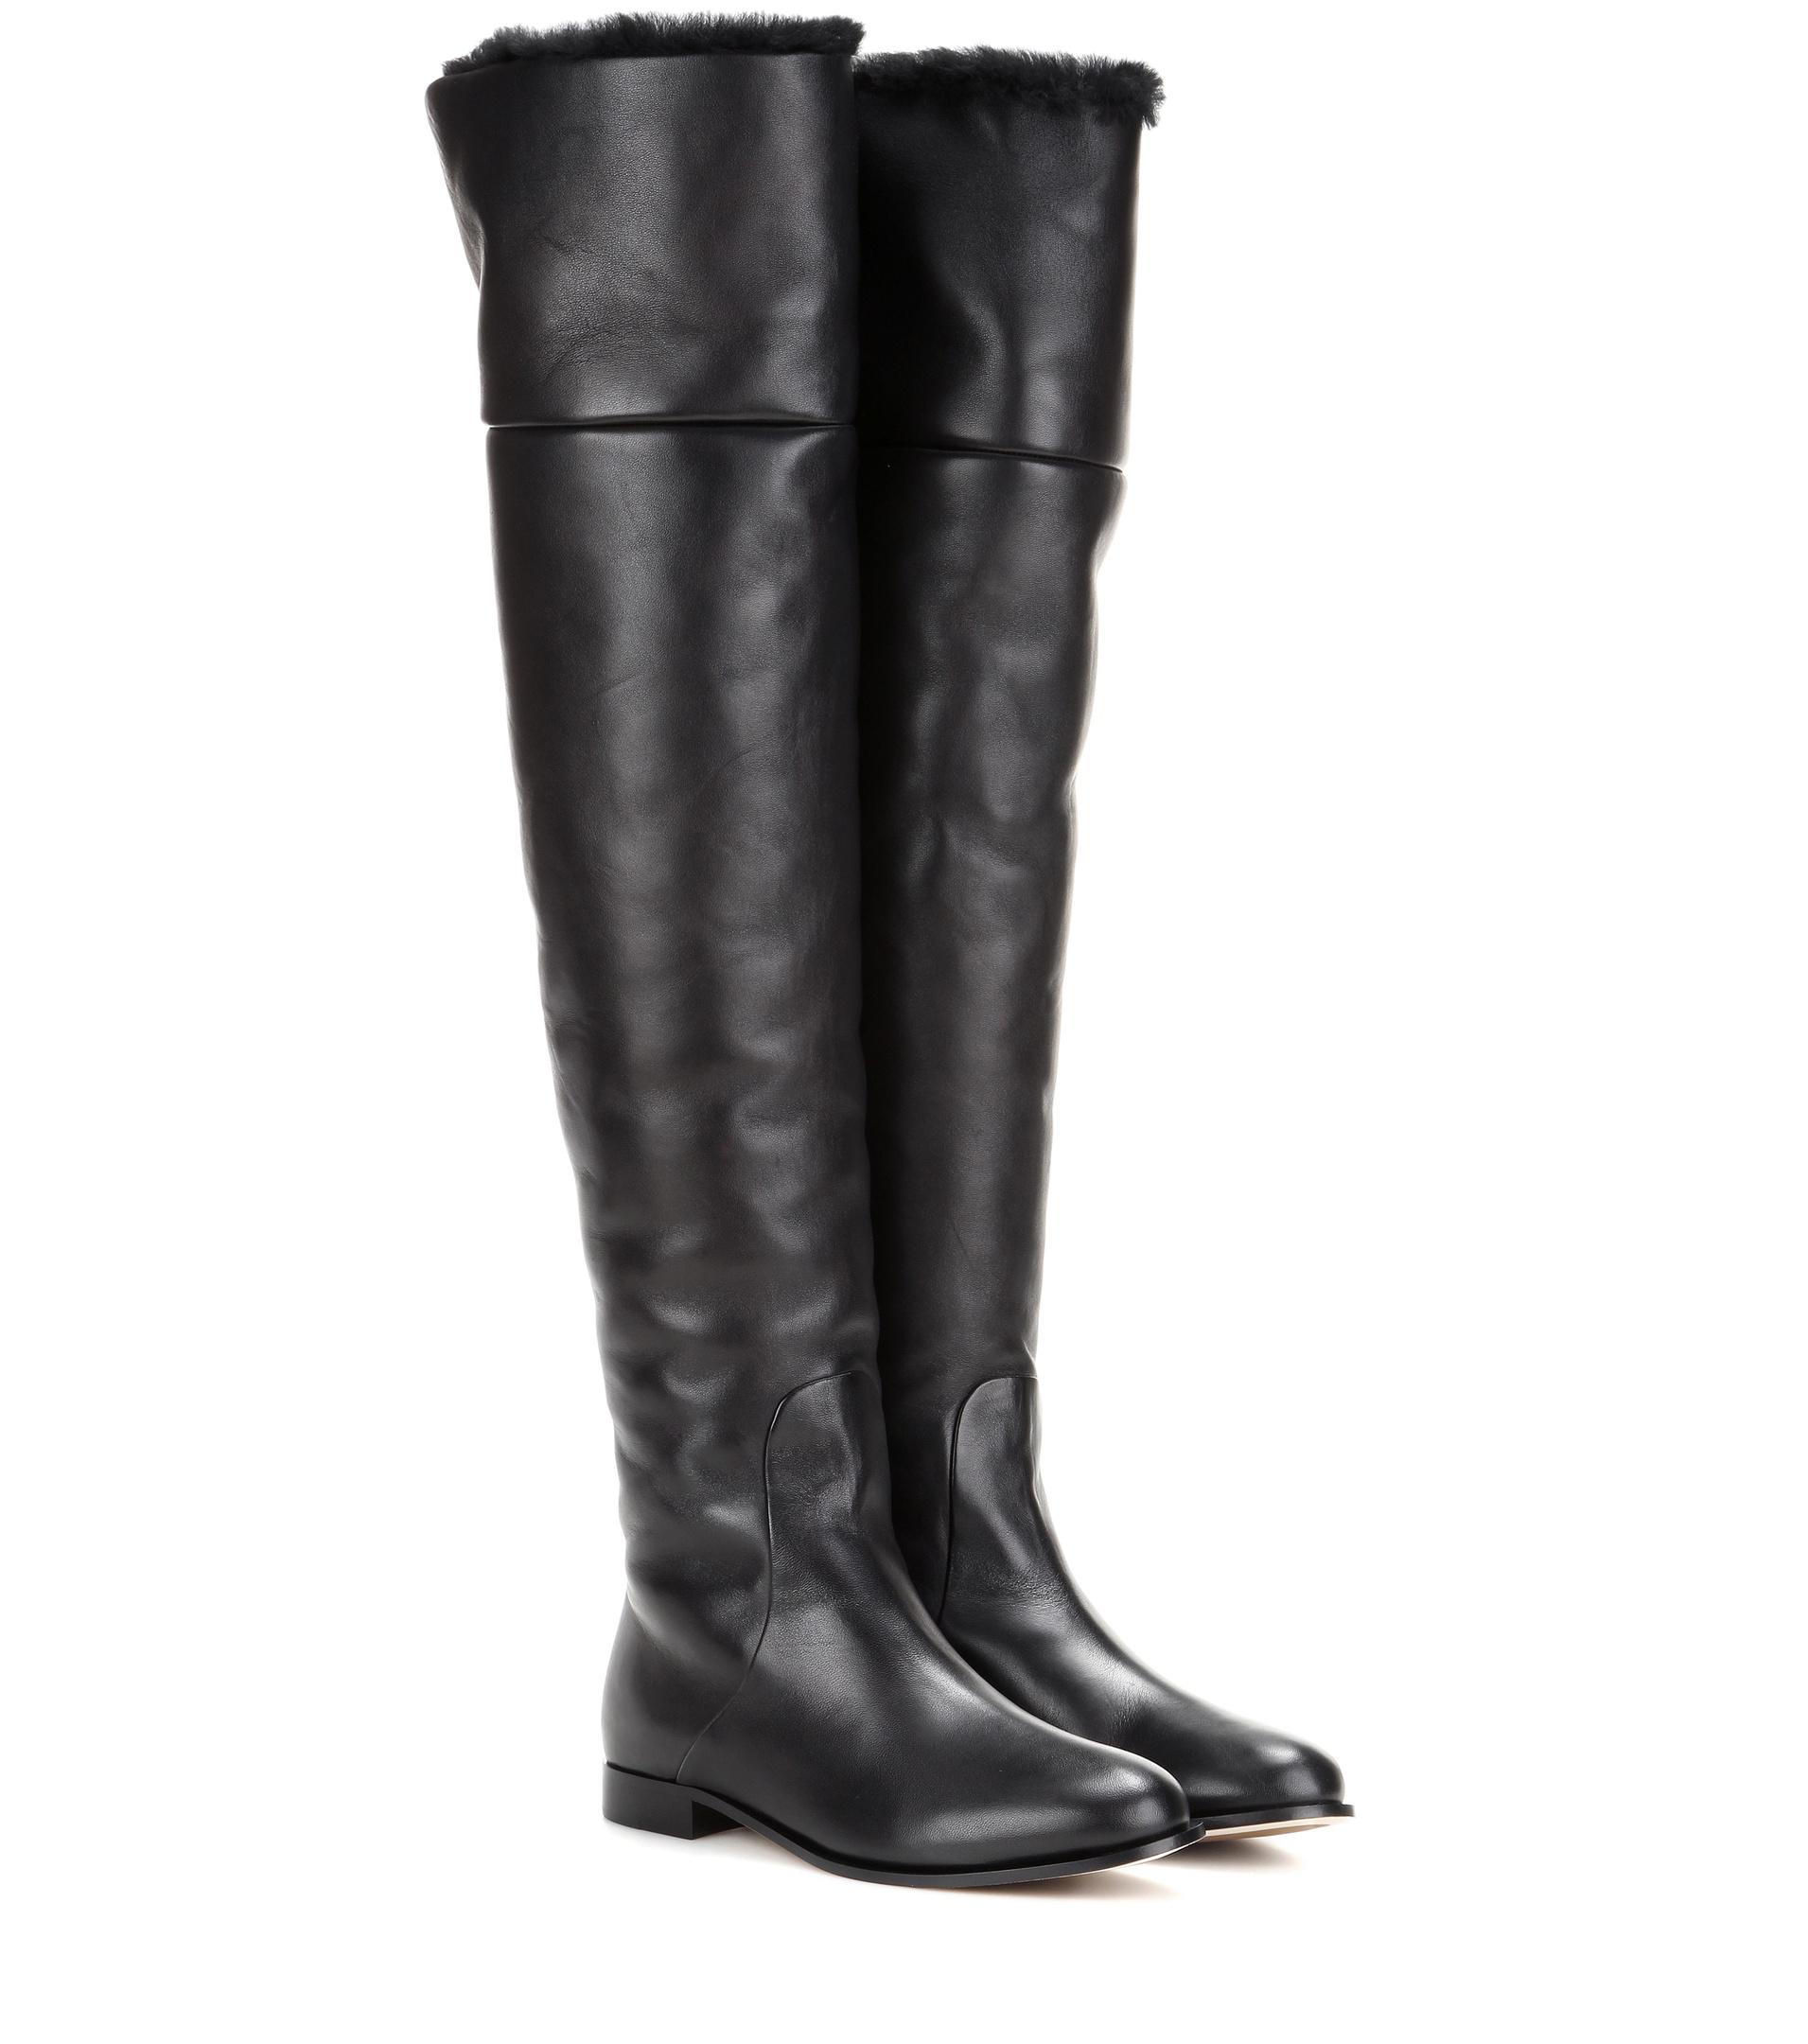 Lyst - Jimmy Choo Marshall Flat Leather Over-the-knee Boots in Black